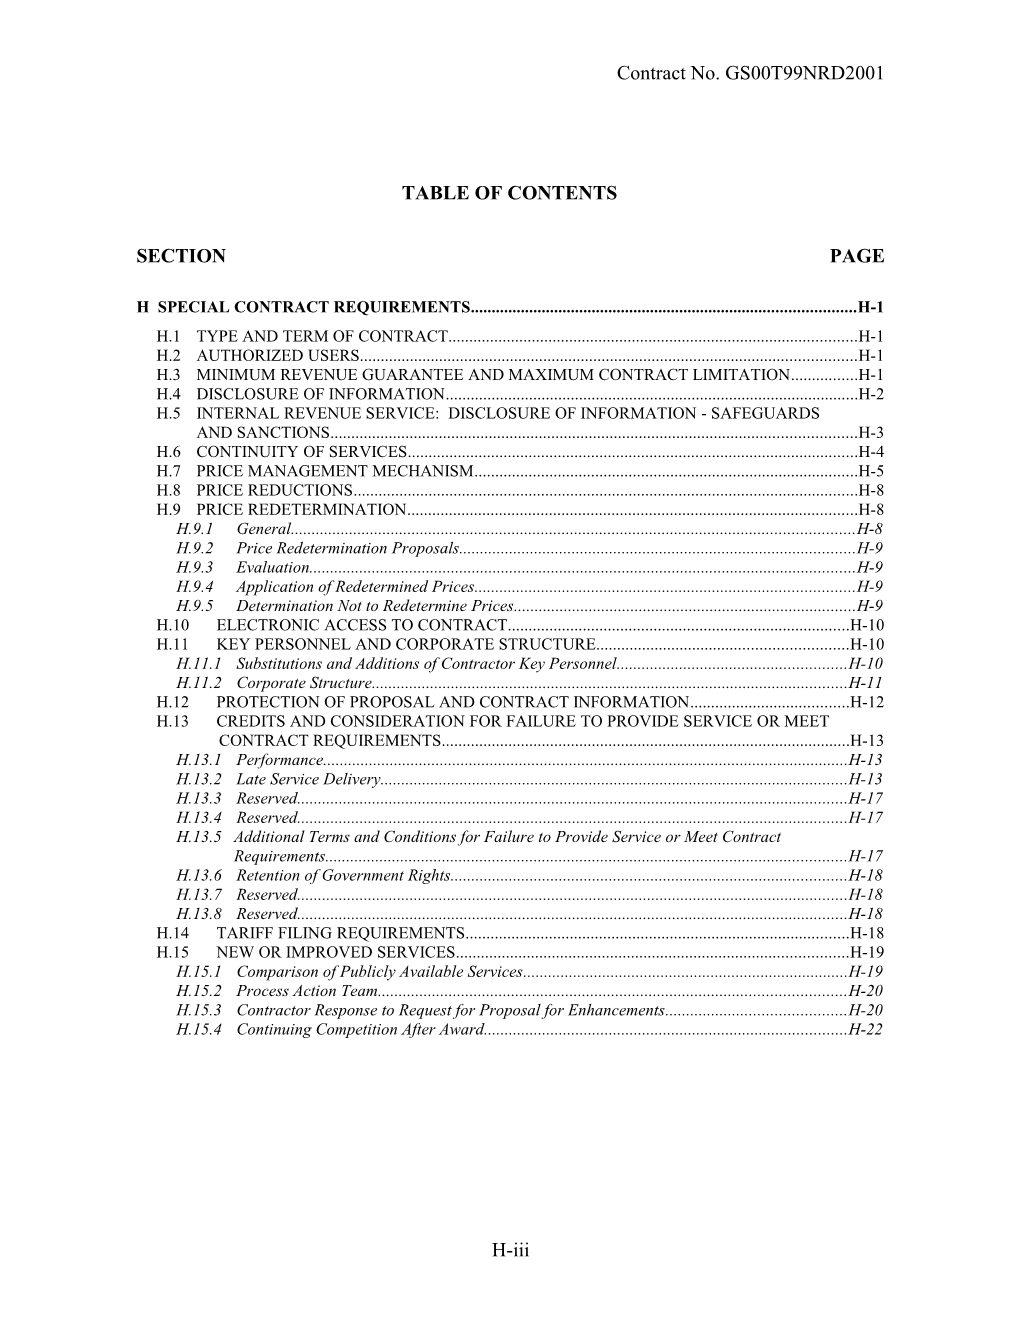 Table of Contents s122